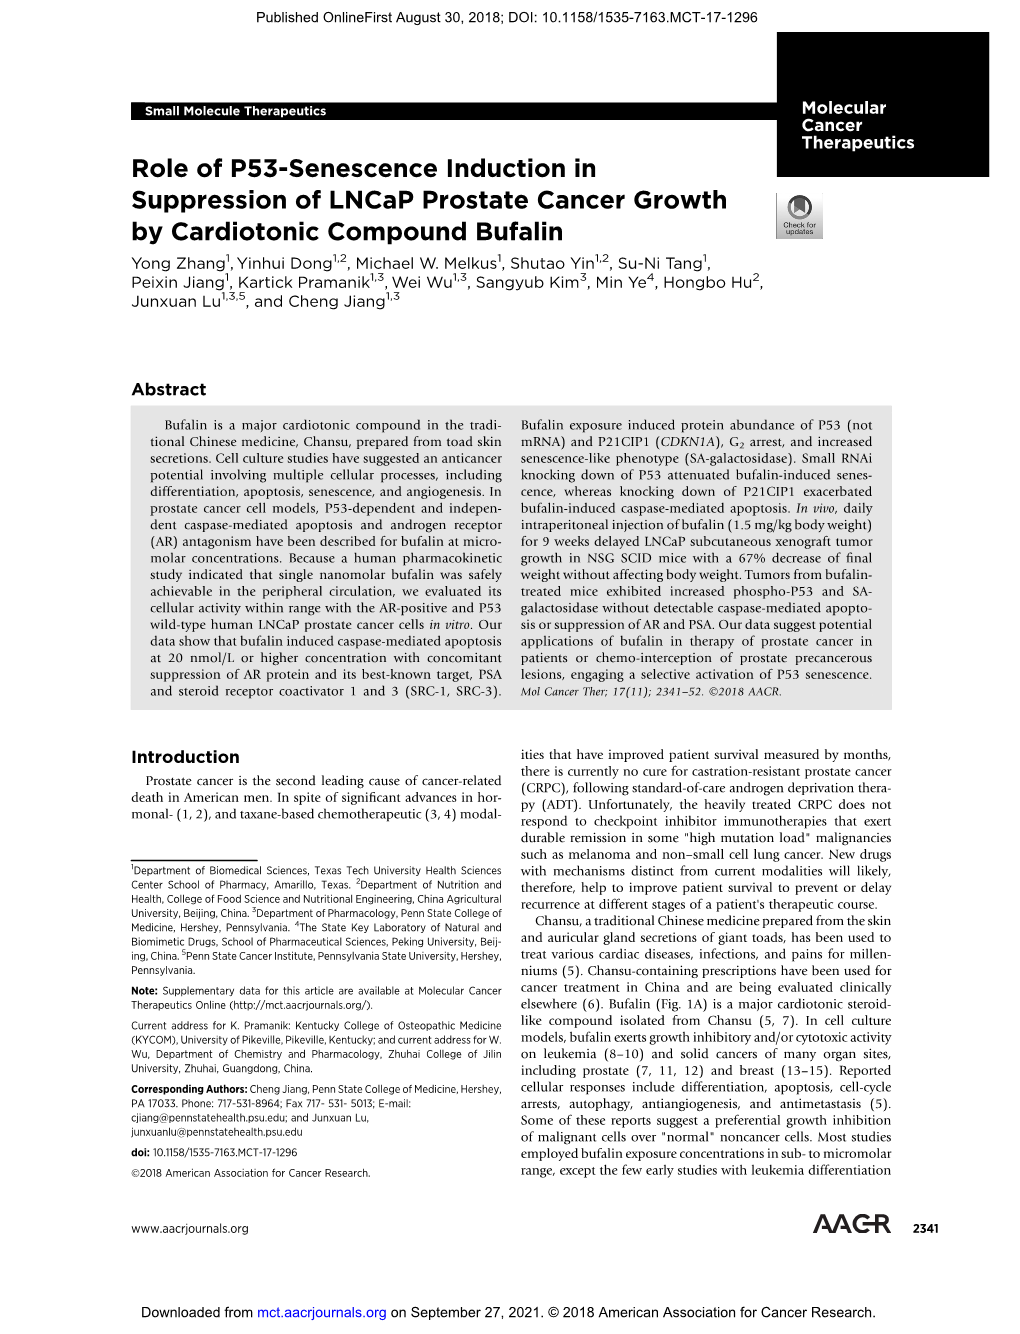 Role of P53-Senescence Induction in Suppression of Lncap Prostate Cancer Growth by Cardiotonic Compound Bufalin Yong Zhang1, Yinhui Dong1,2, Michael W